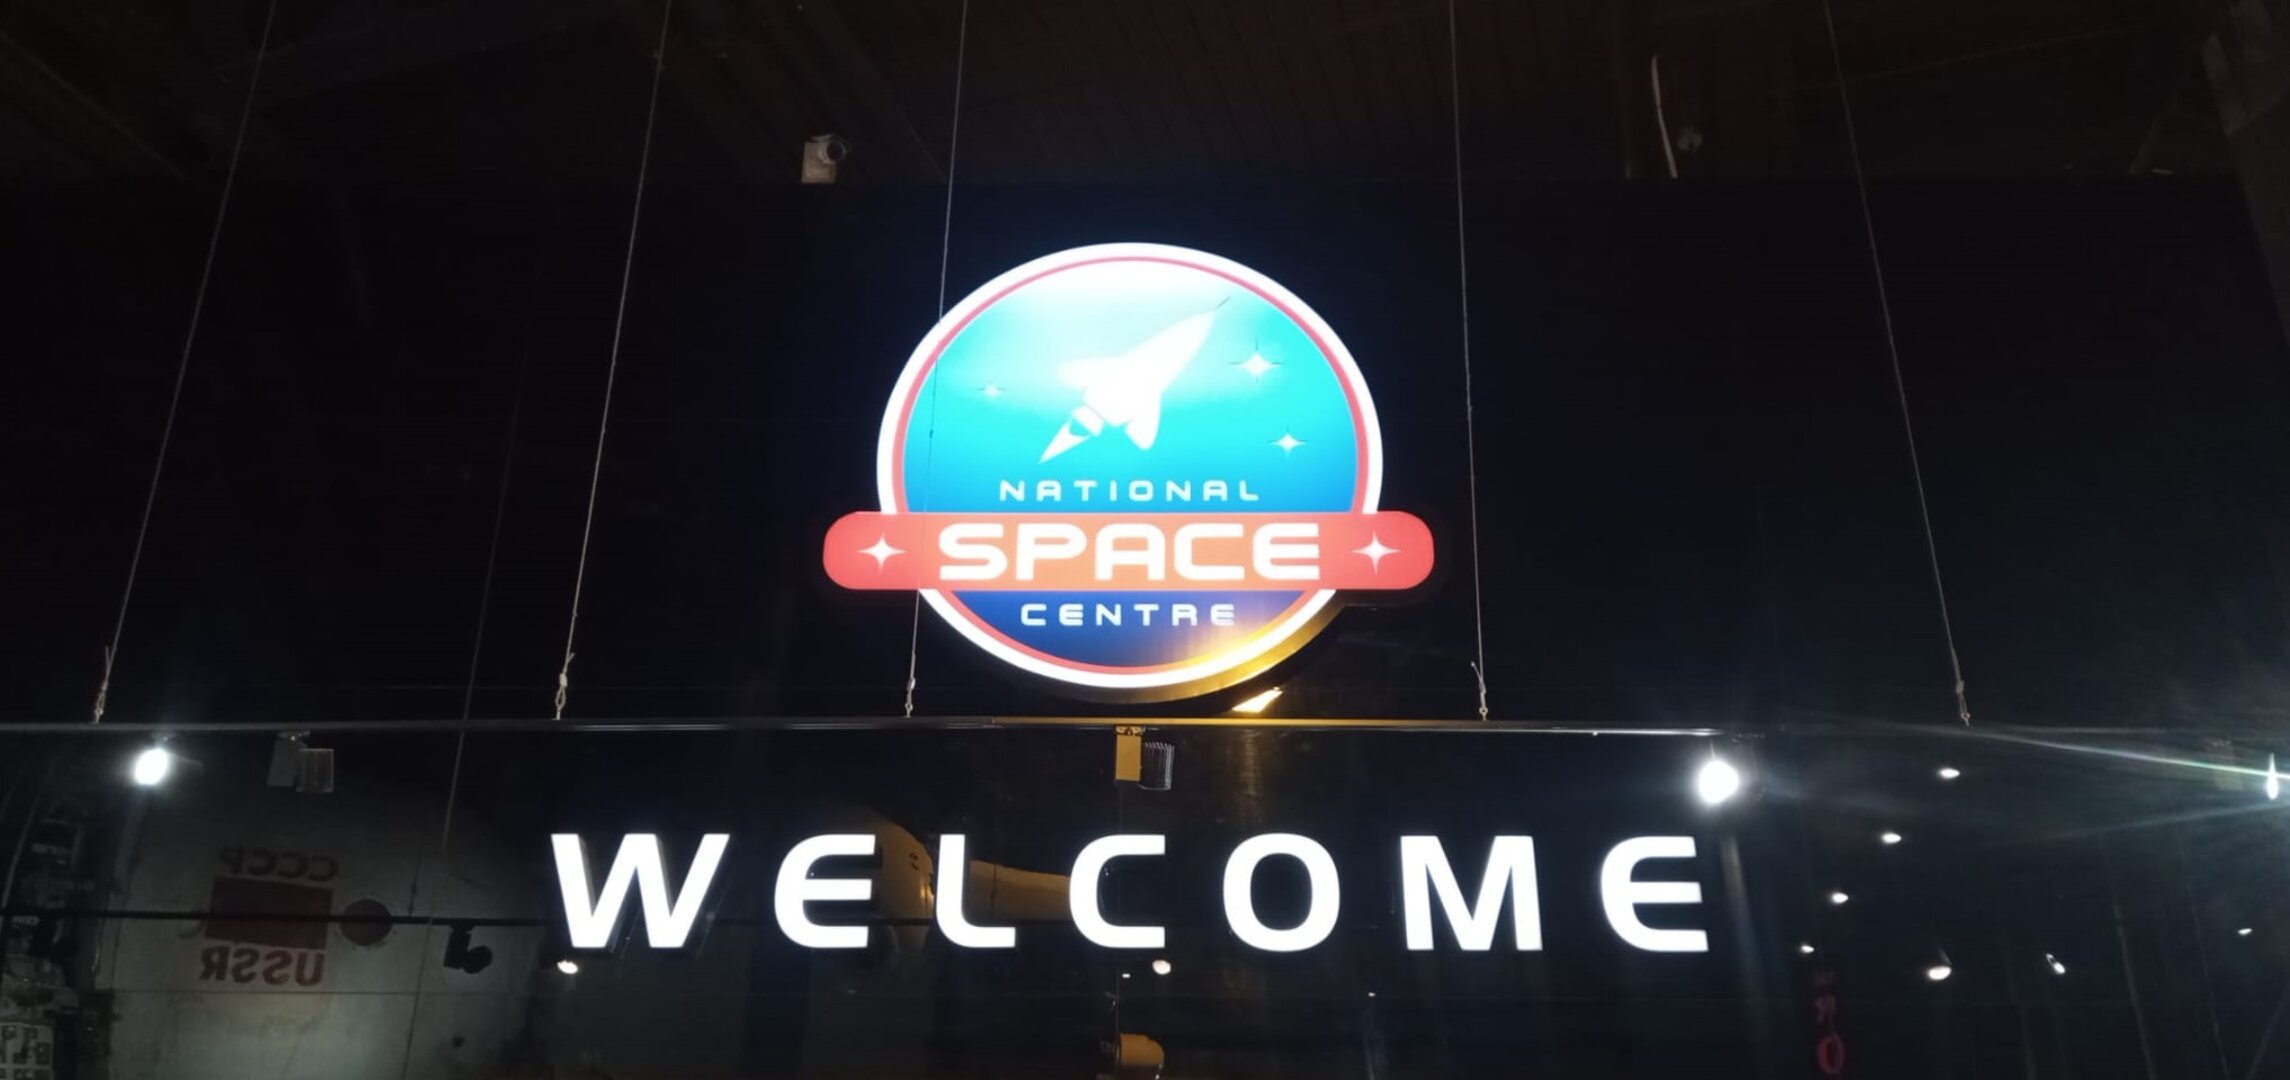 The UK's National Space Centre